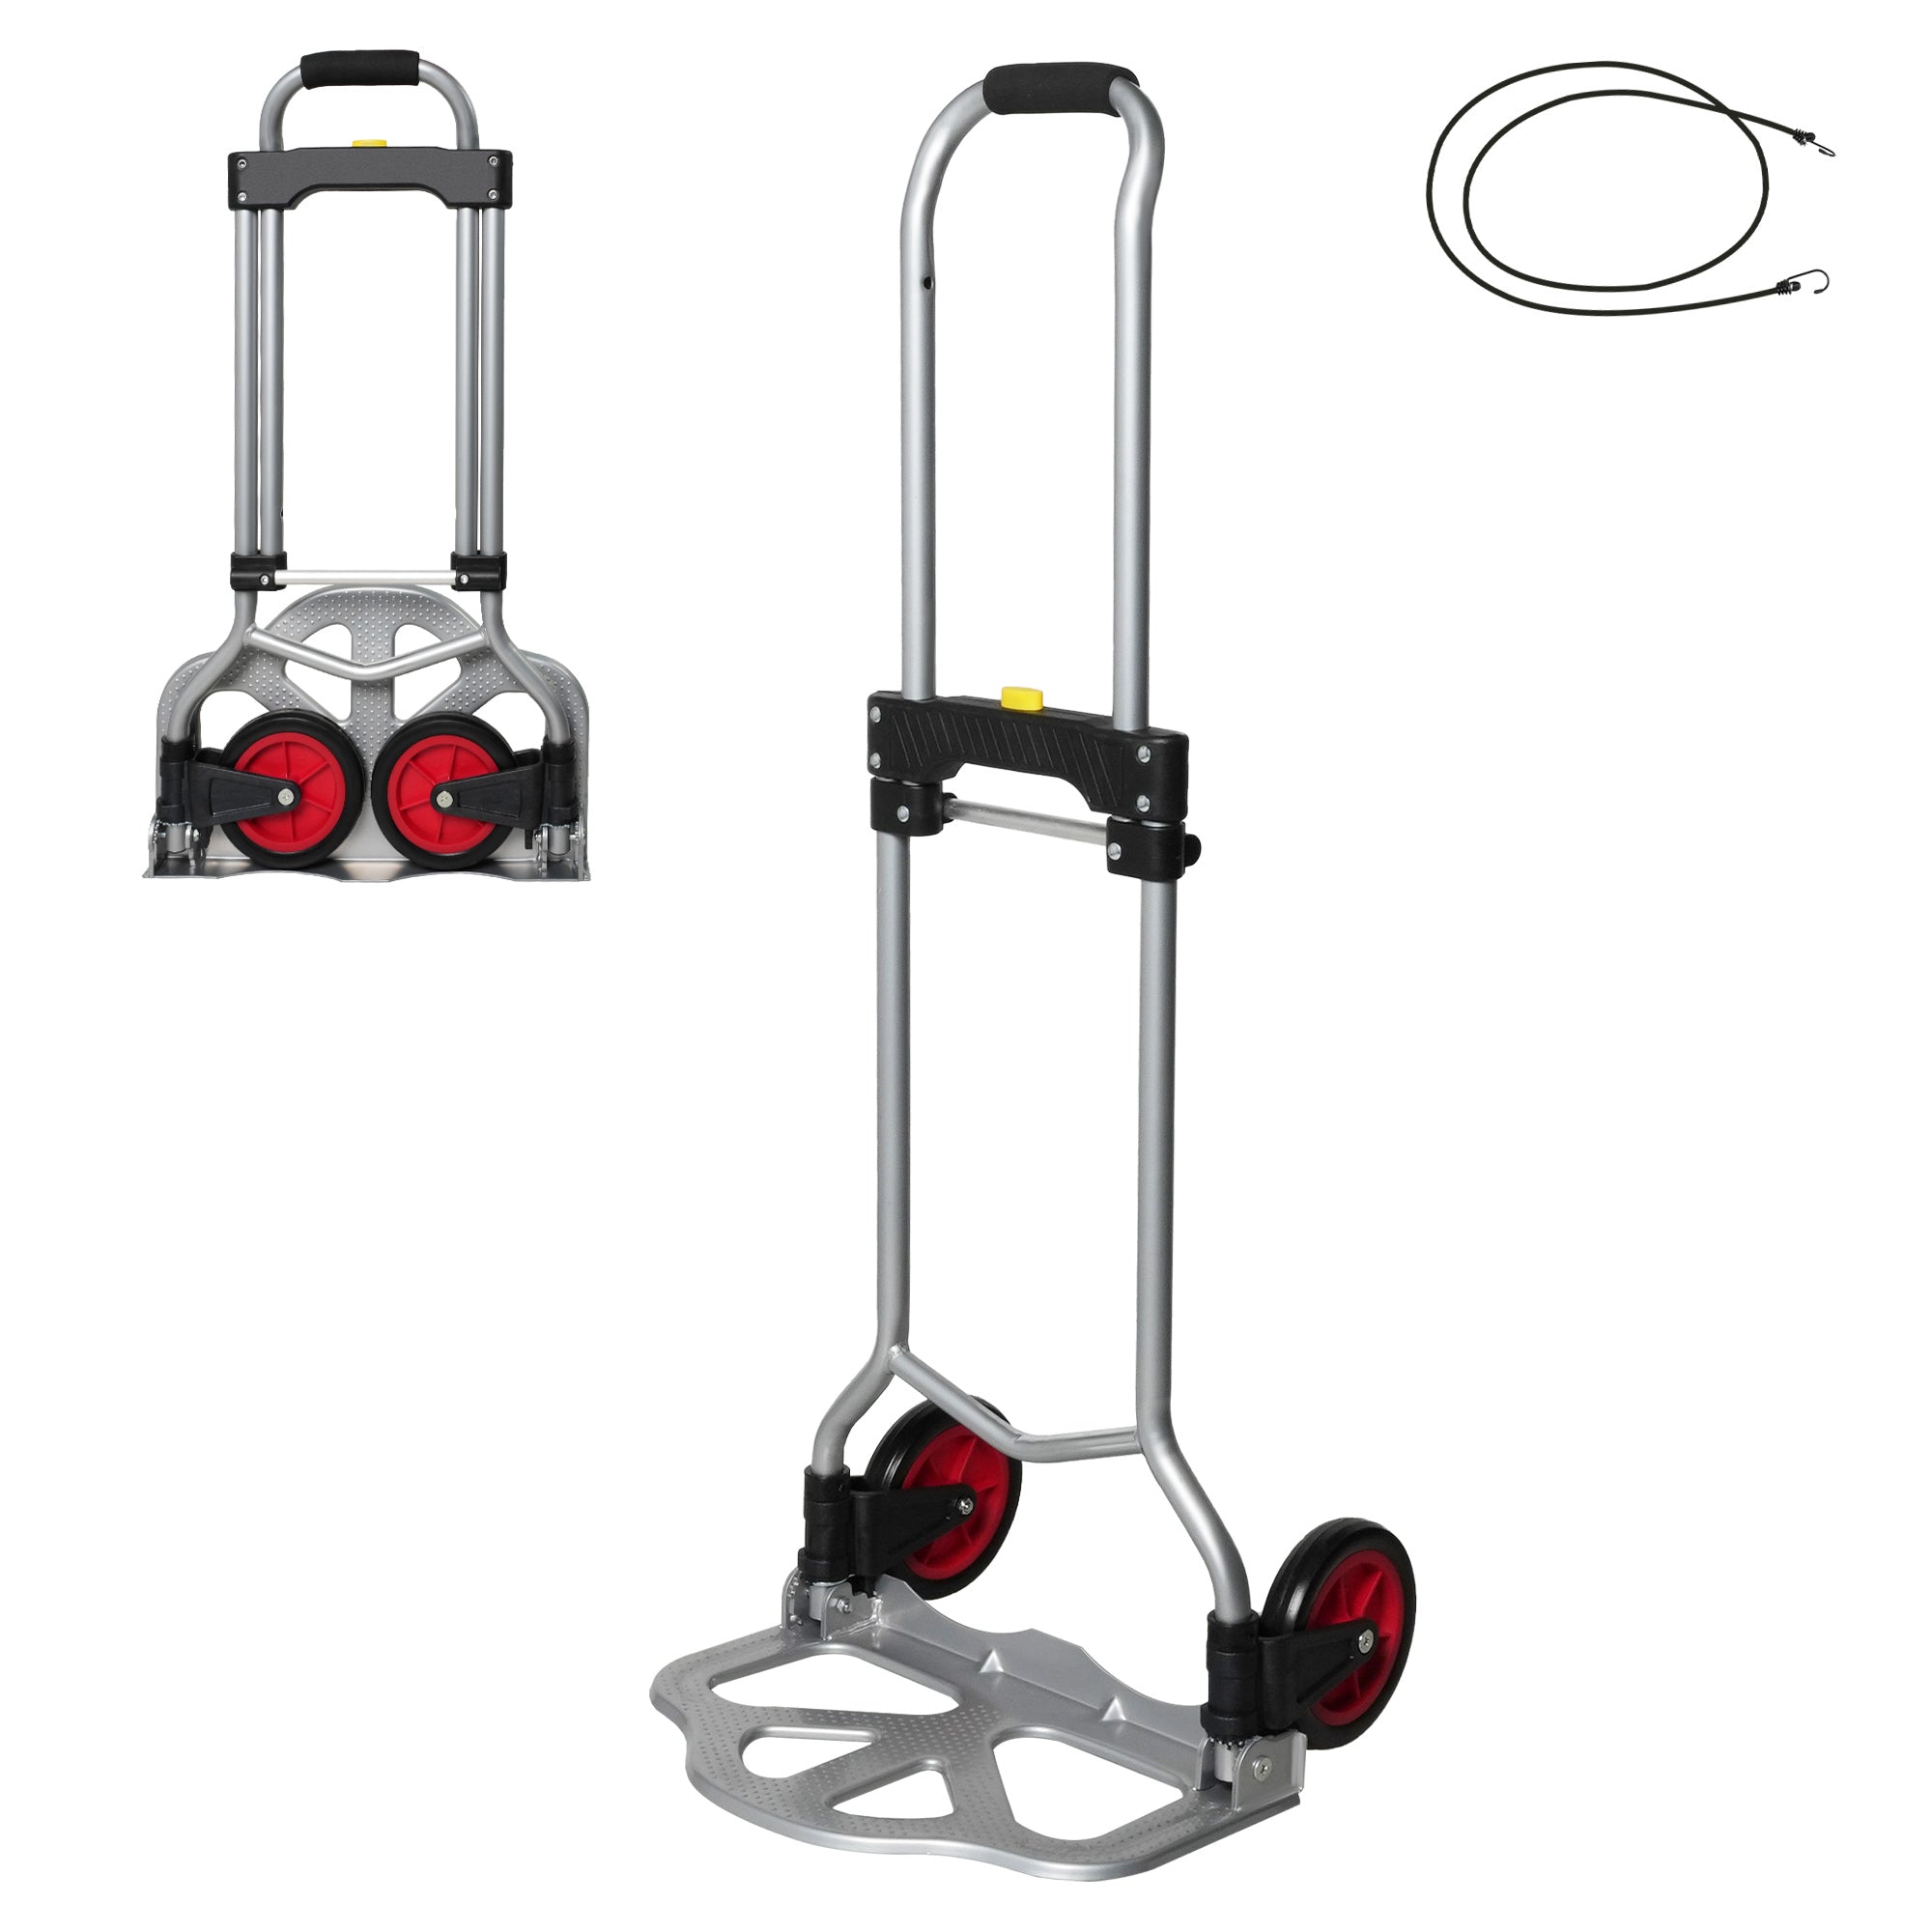 Portable Folding Hand Truck Dolly Hand Cart Aluminum with Telescoping Handle, 132lbs Capacity